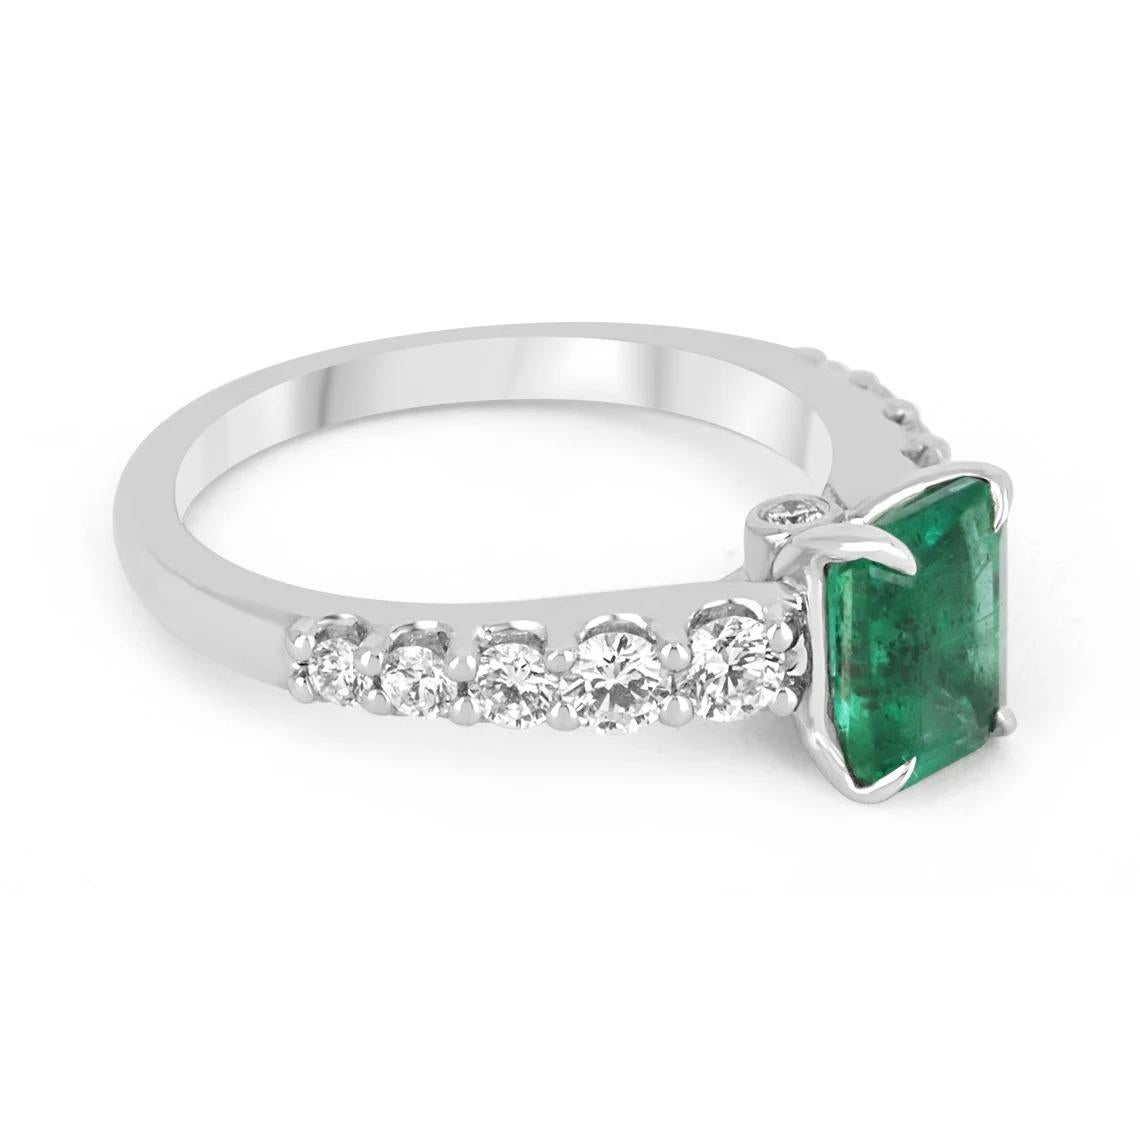 Elegantly displayed is a natural emerald-cut emerald and diamond ring. The center gem is a beautiful quality, emerald cut, emerald filled with life and brilliance! Among the emeralds, impressive qualities are their vibrant color and beautiful eye